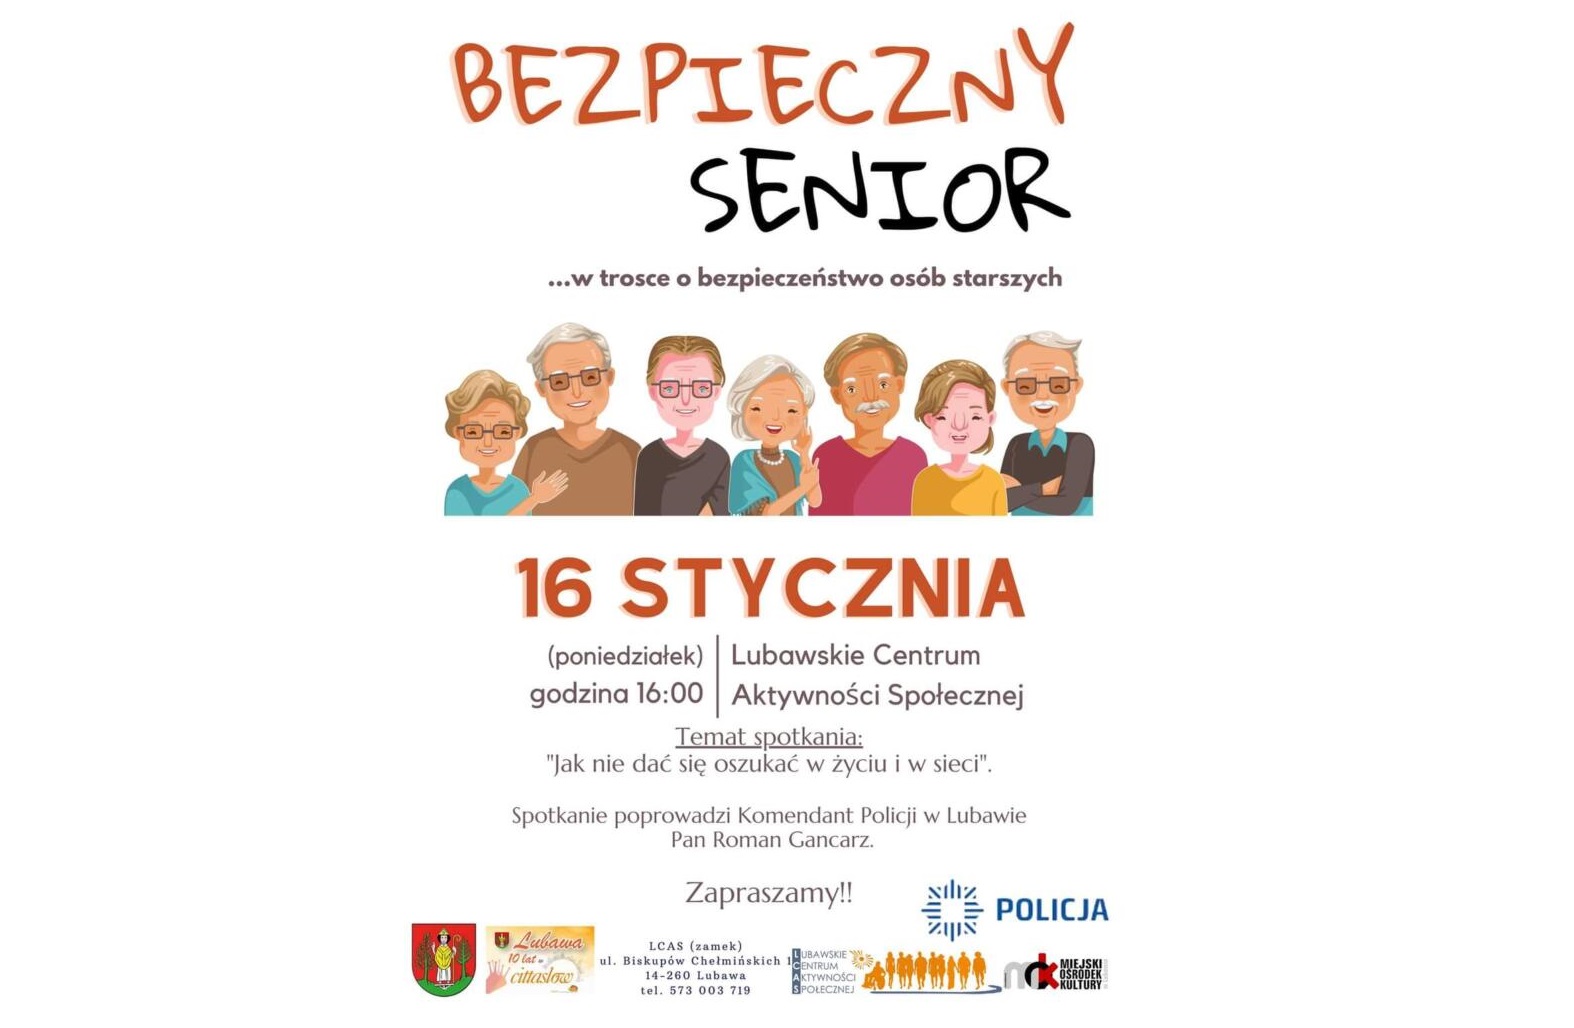 You are currently viewing Bezpieczny senior